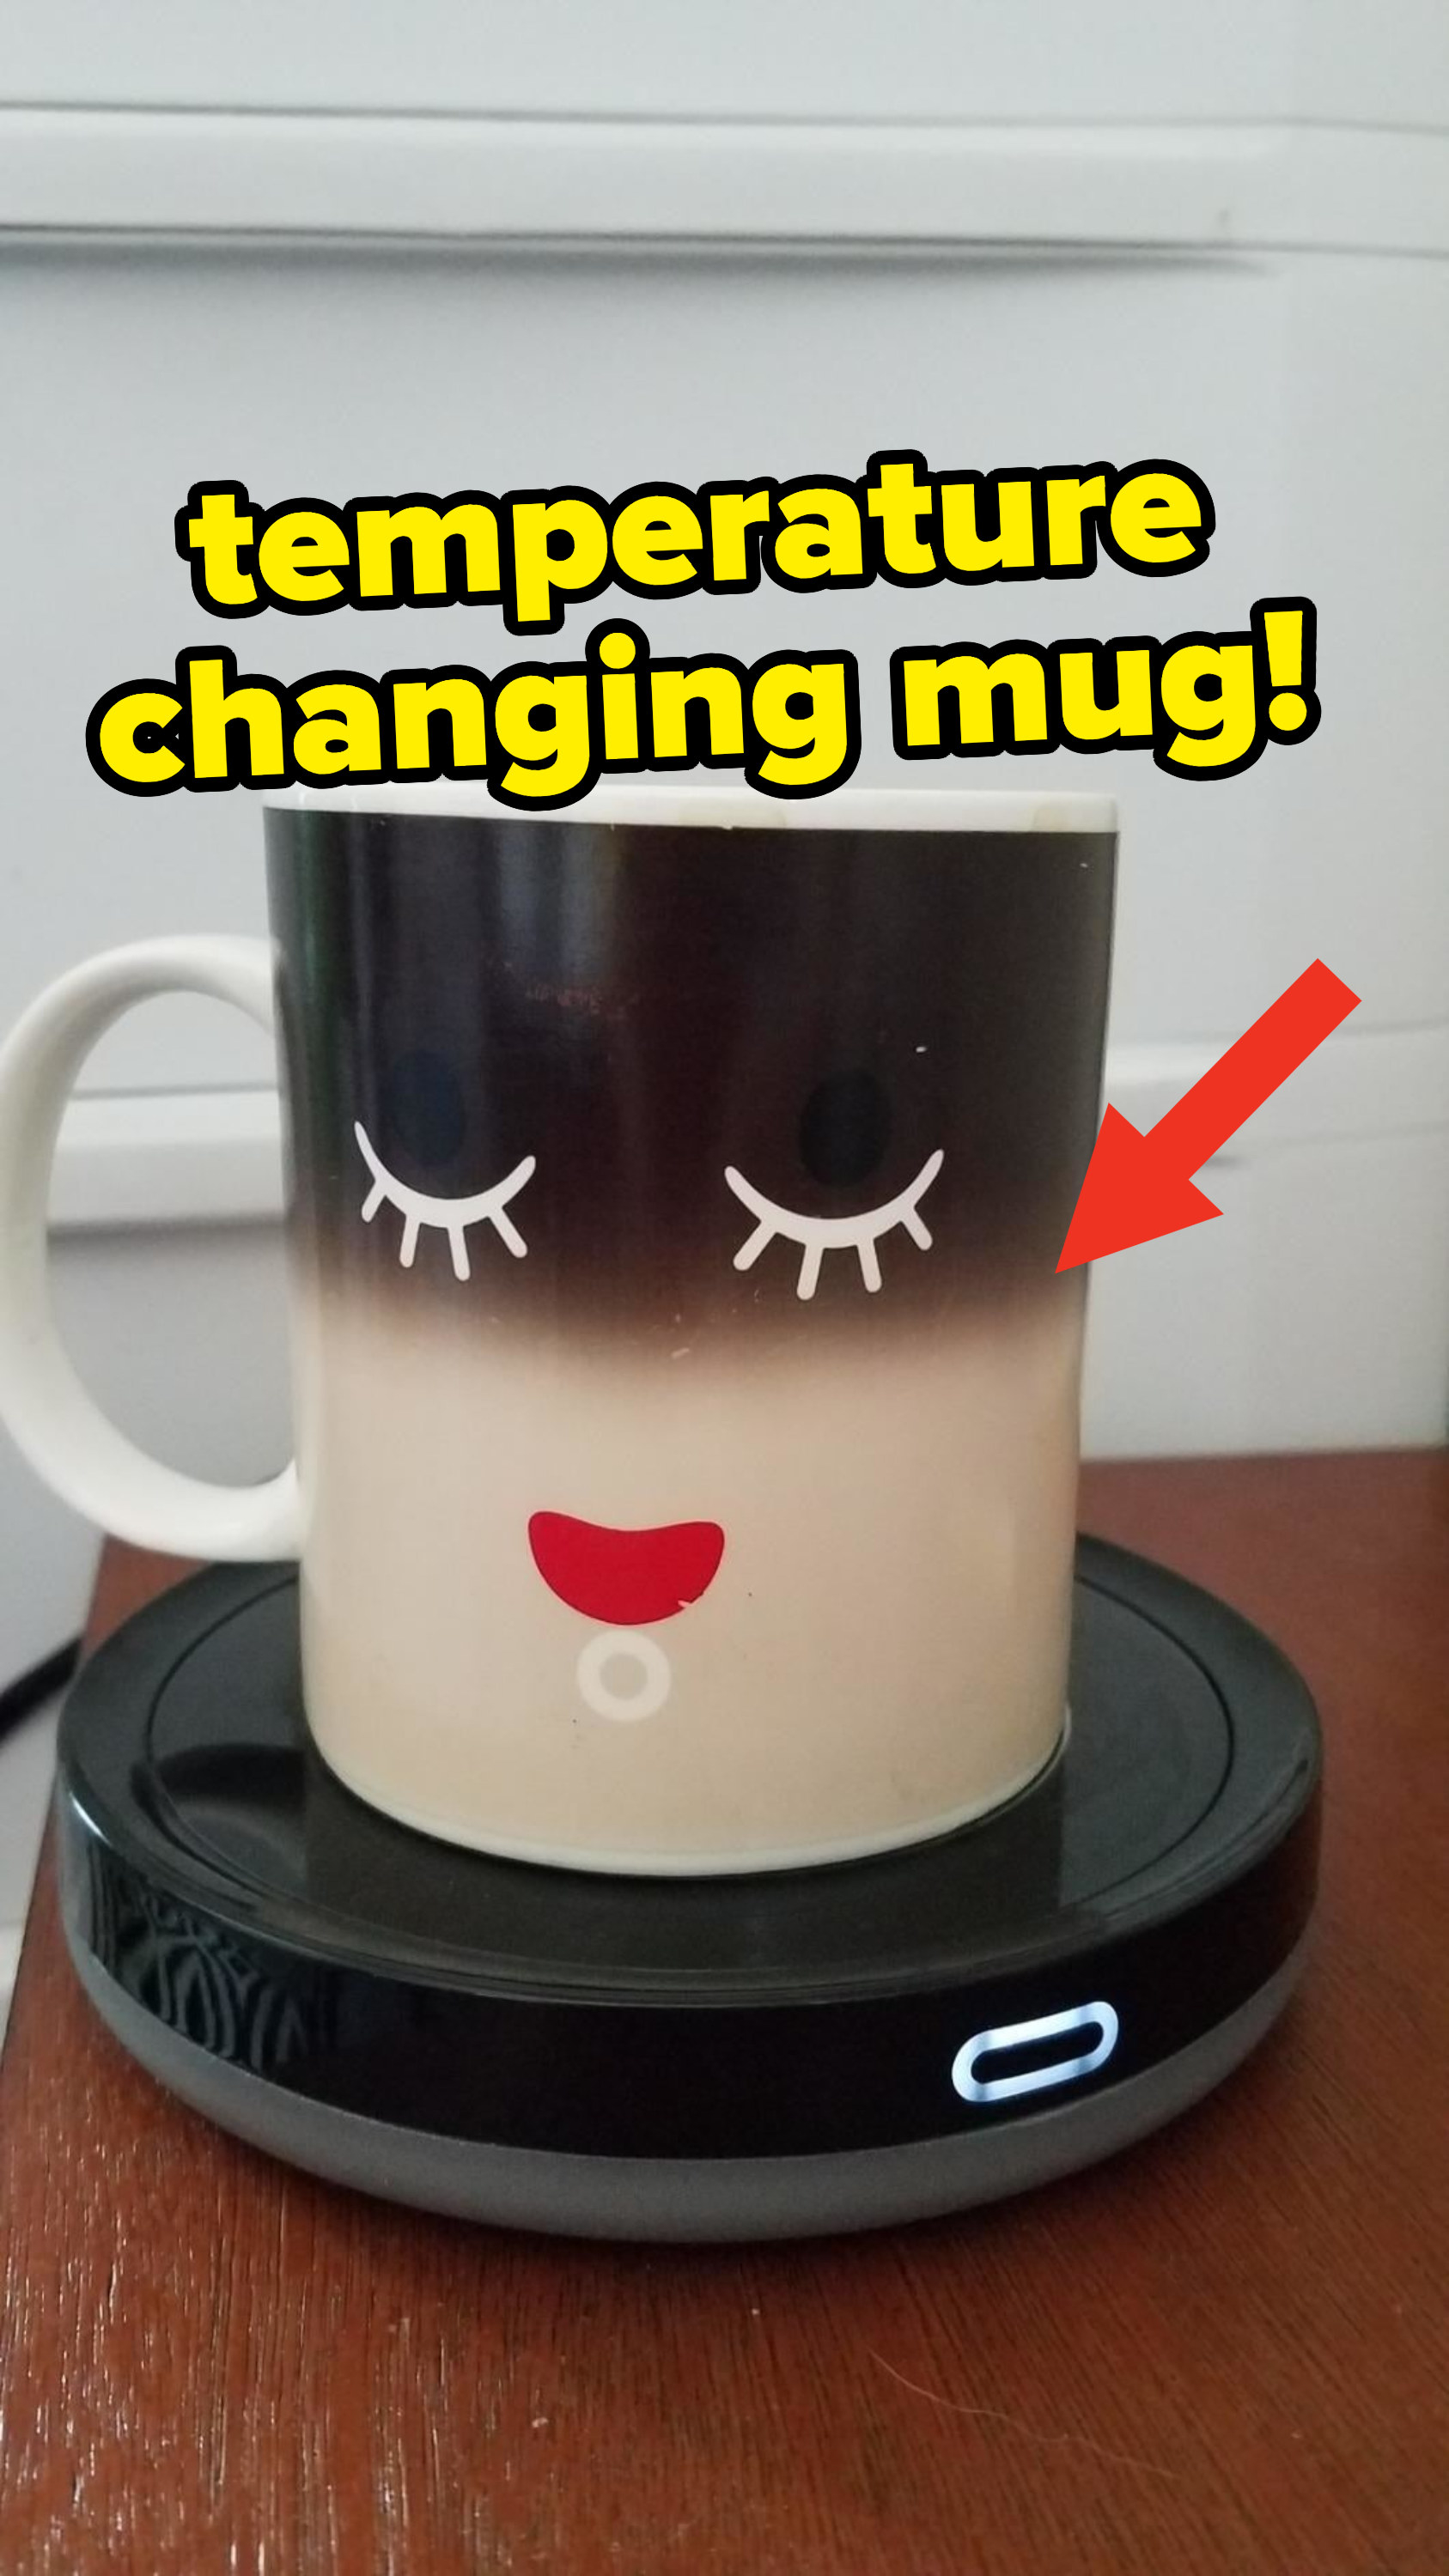 High Quality Ceramic W/ Glossy Finish 11Oz|Drink W/ Style In Our Unique Color Changing Mug Meme Queen Premium Full Color Changing Mug